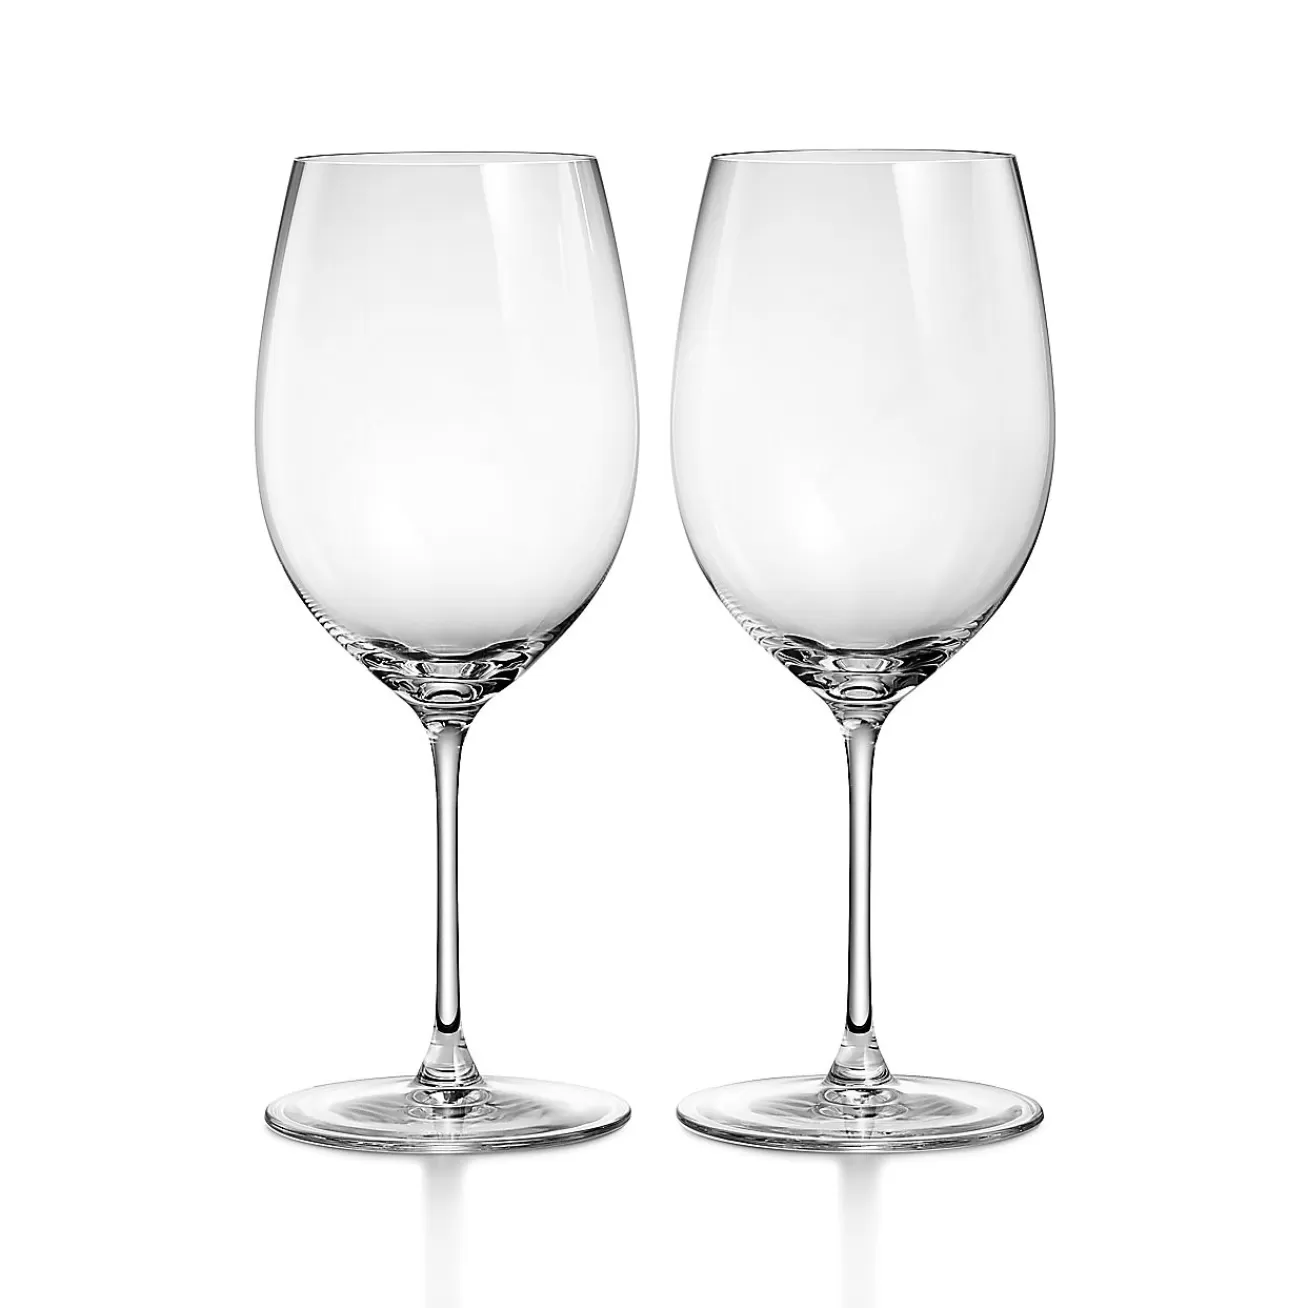 Tiffany & Co. Tiffany Home Essentials Red Wine Glasses in Crystal Glass, Set of Two | ^ The Home | Housewarming Gifts